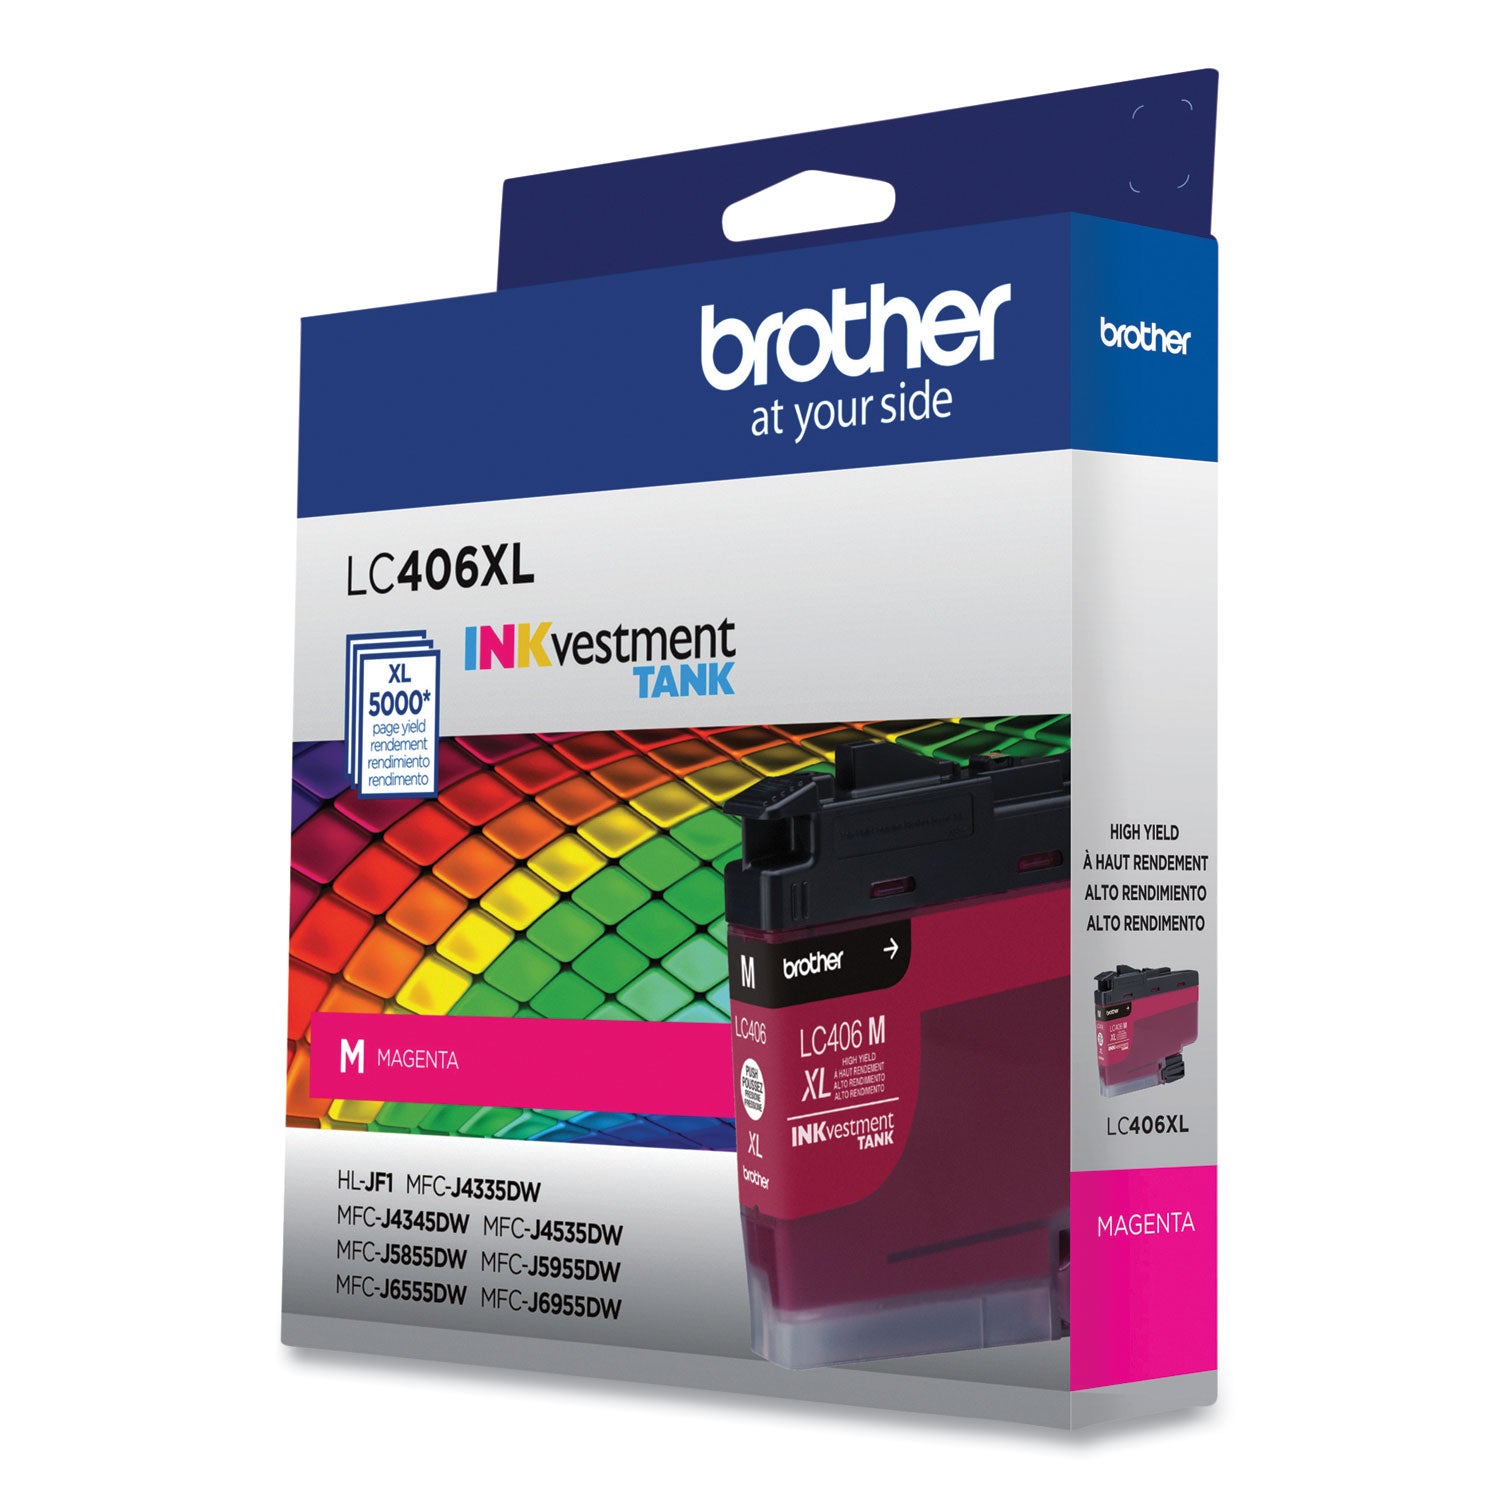 lc406xlms-inkvestment-high-yield-ink-5000-page-yield-magenta_brtlc406xlms - 2